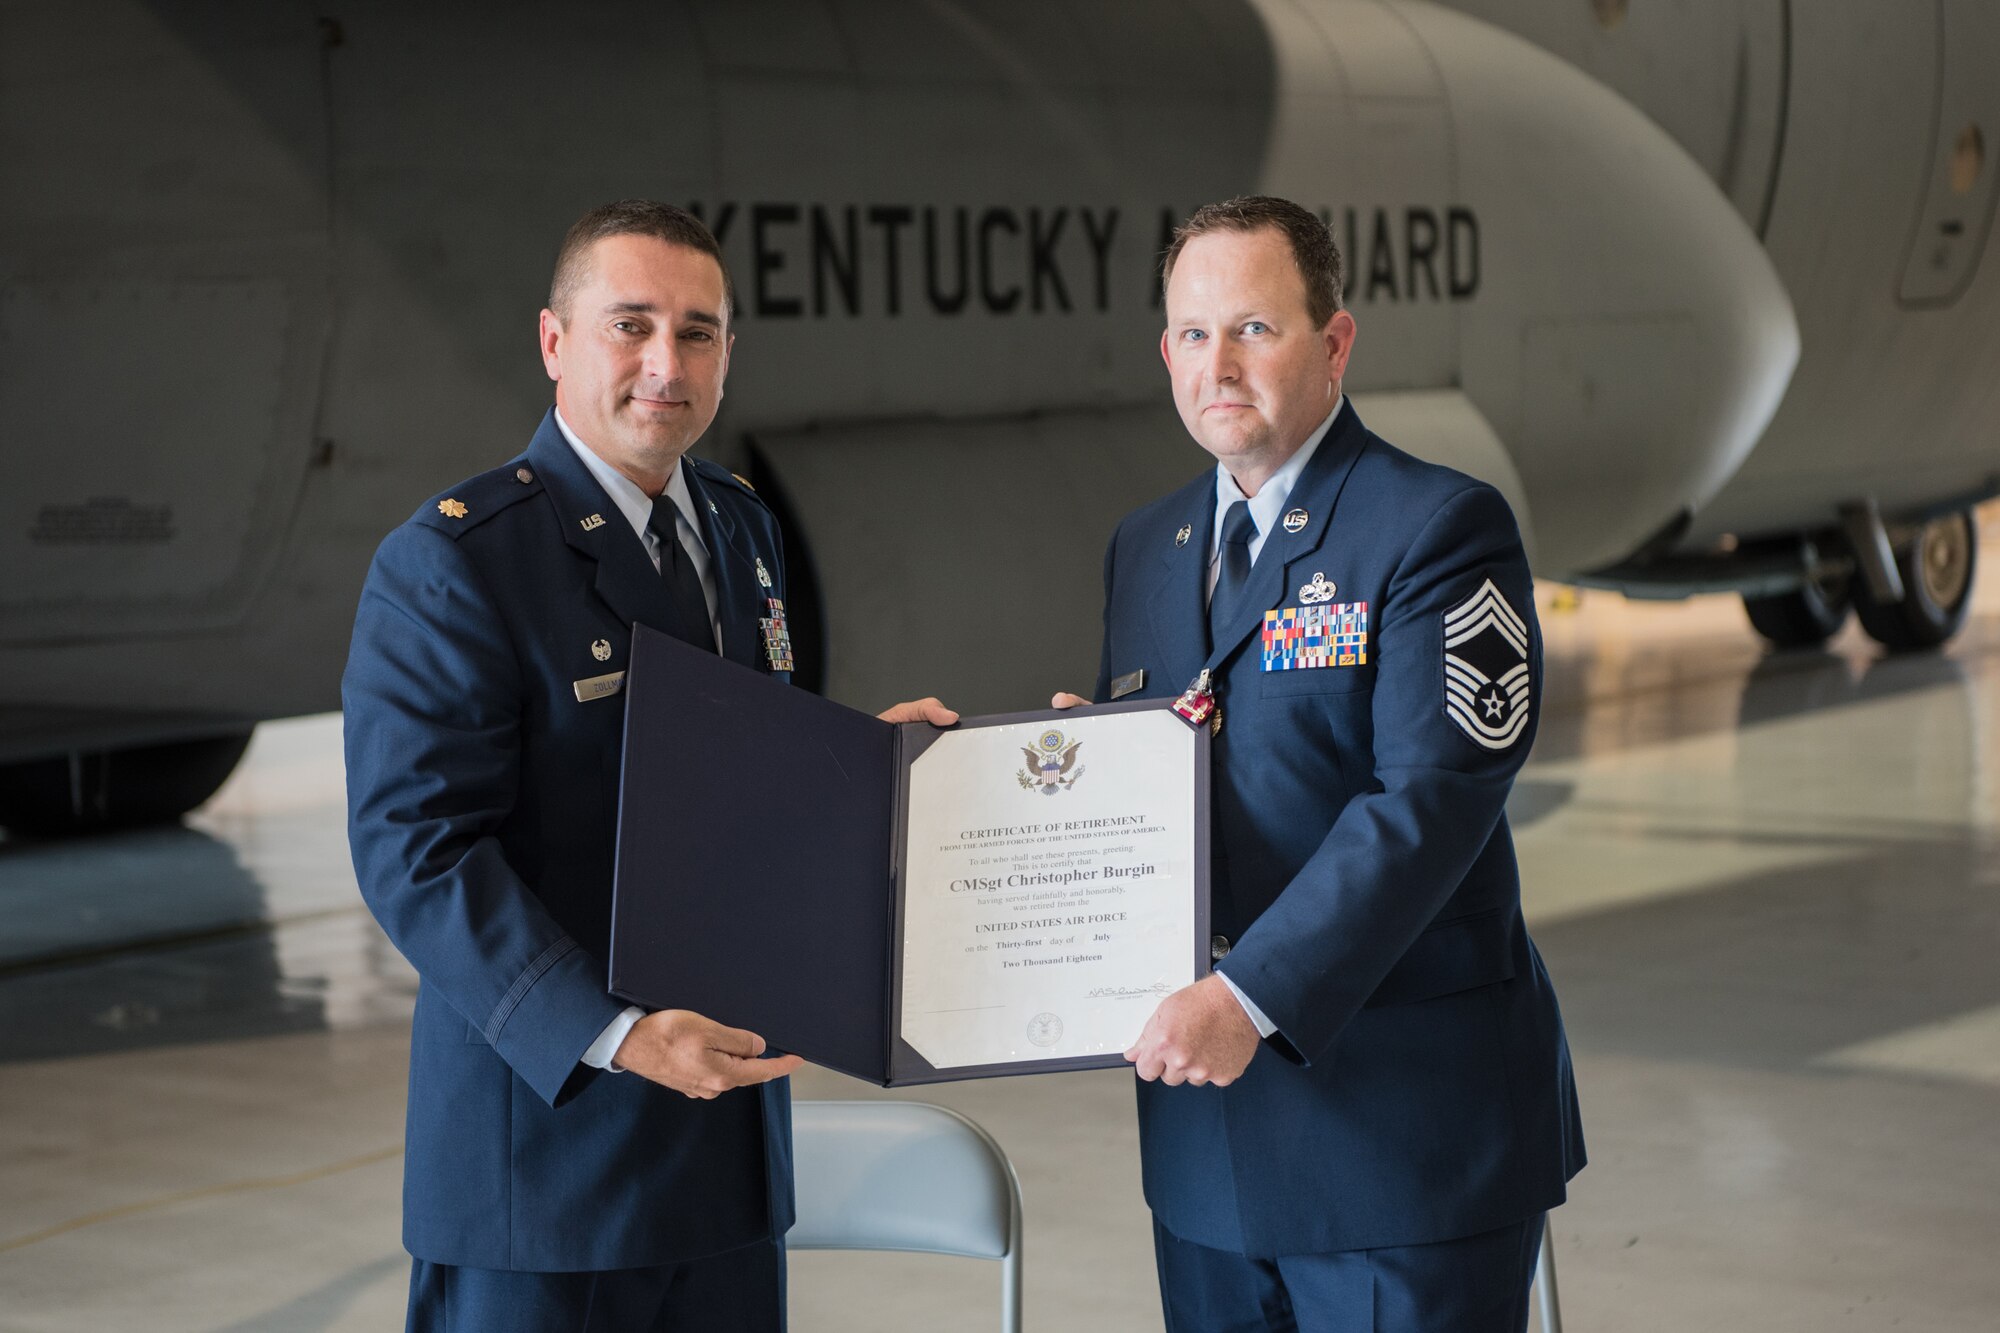 Maj. Jerry Zollman (left), commander of the 123rd Maintenance Squadron, presents the certificate of retirement to Chief Master Sgt. Chris Burgin, superintendent of the 123rd Maintenance Group, during Burgin's retirement ceremony at the Kentucky Air National Guard base in Louisville, Ky., on July 14, 2018. Burgin was the first chief master sergeant selected to fill the newly created superintendent position for the 123rd Maintenance Group. (U.S. Air National Guard photo by Master Sgt. Phil Speck)